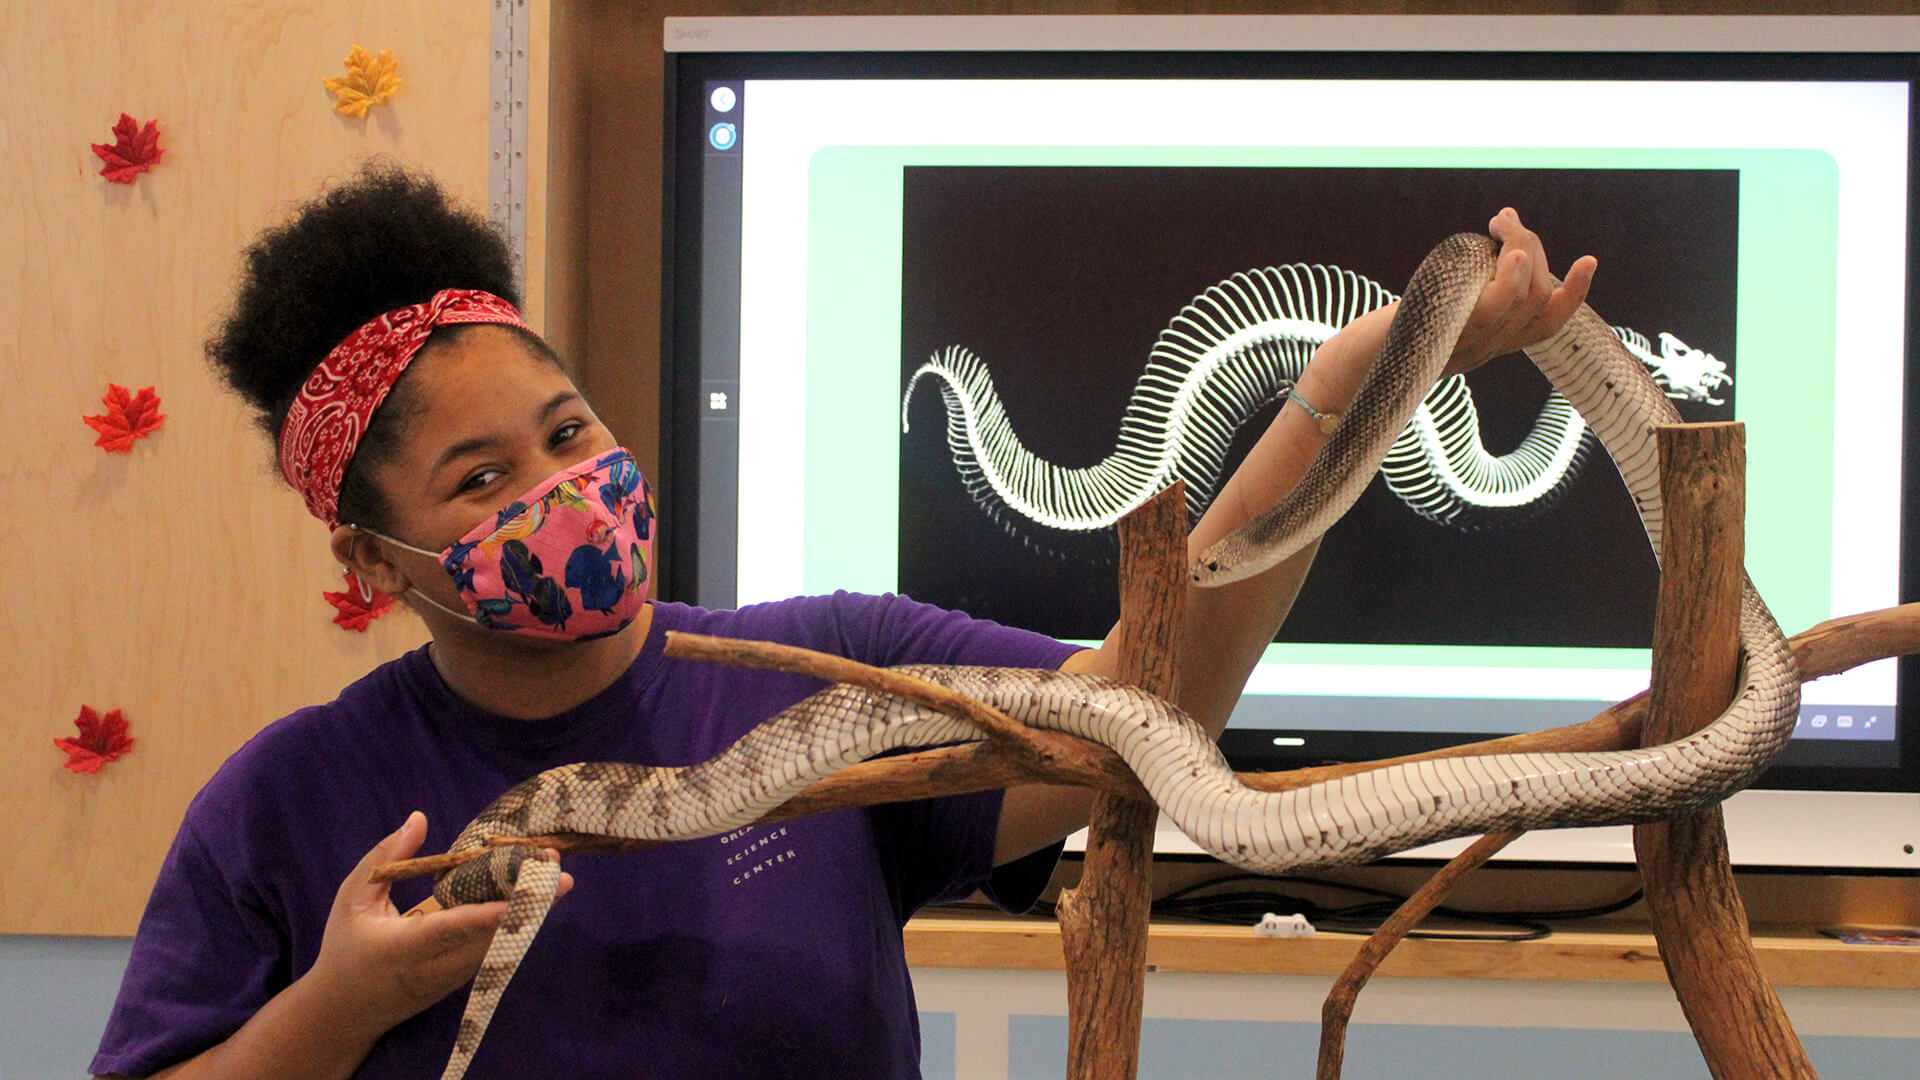 OSC staff member holding snake with x-ray of a snake in background.